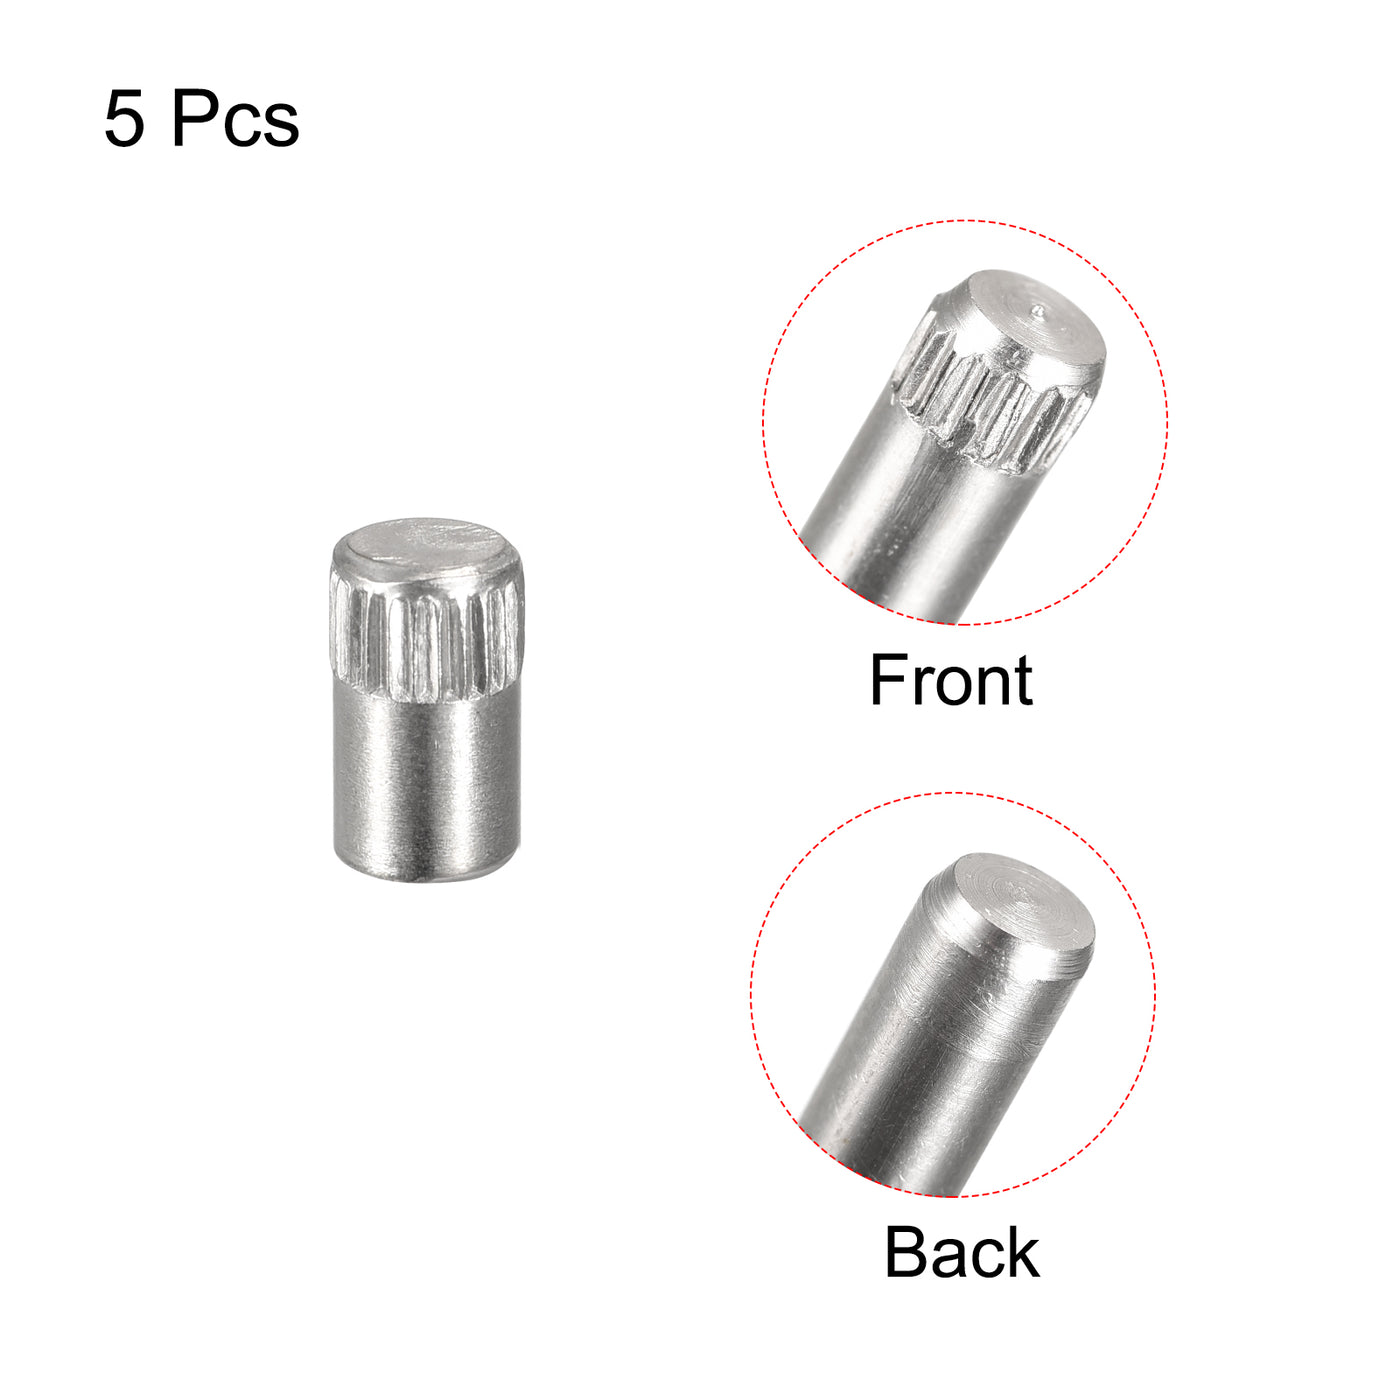 uxcell Uxcell 6x8mm 304 Stainless Steel Dowel Pins, 5Pcs Knurled Head Flat End Dowel Pin